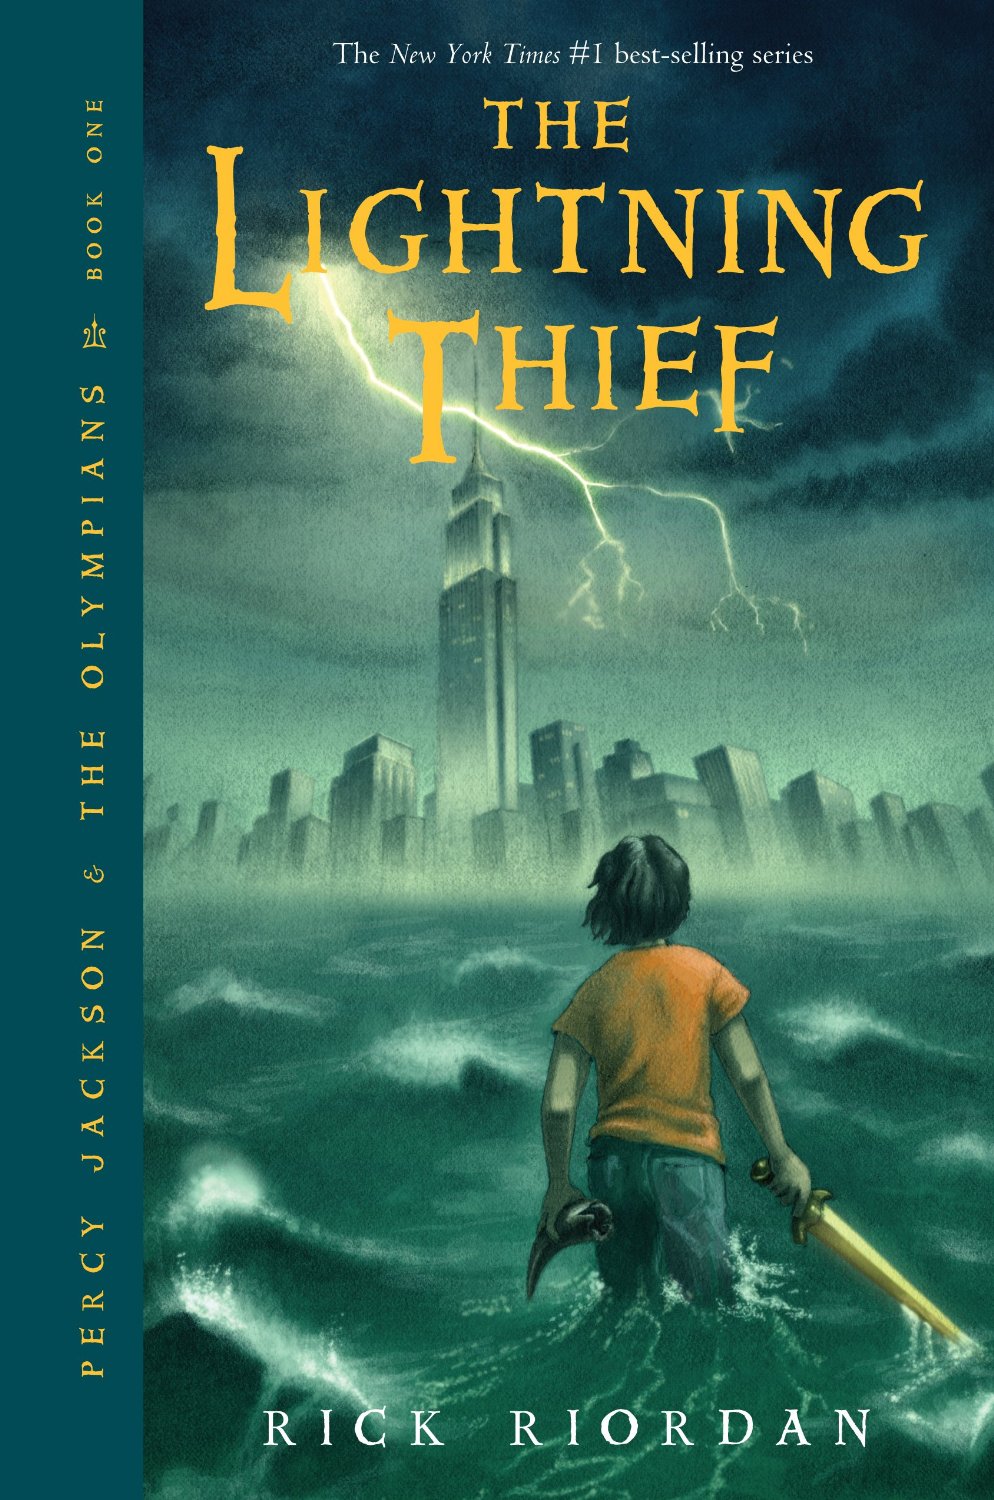 New Percy Jackson CoversThe Lightning Thief and The Sea of Monsters by